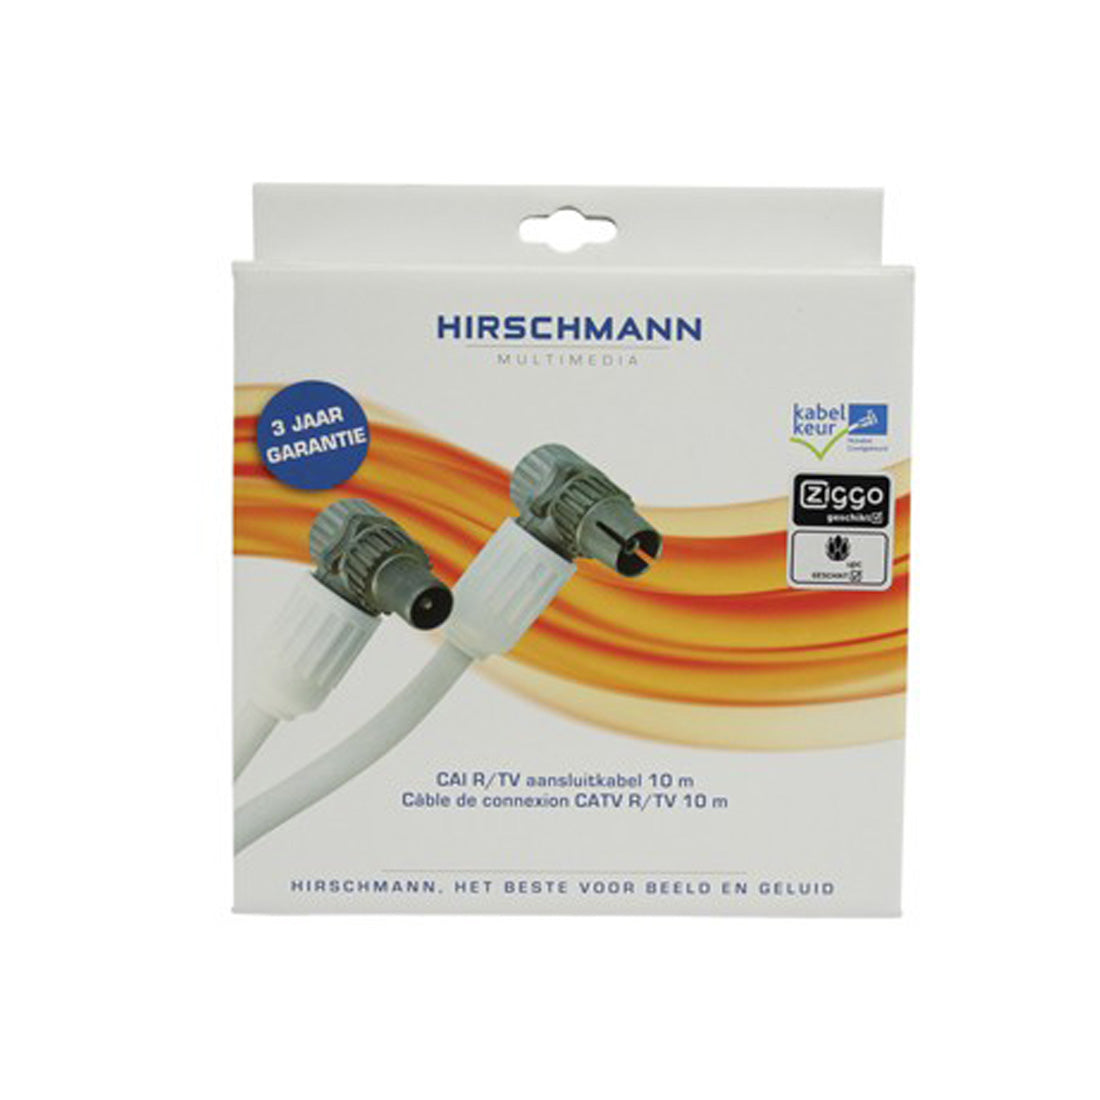 Hirschmann Electronics Coaxial connection cable with CATV R/TV connectors, 10 m